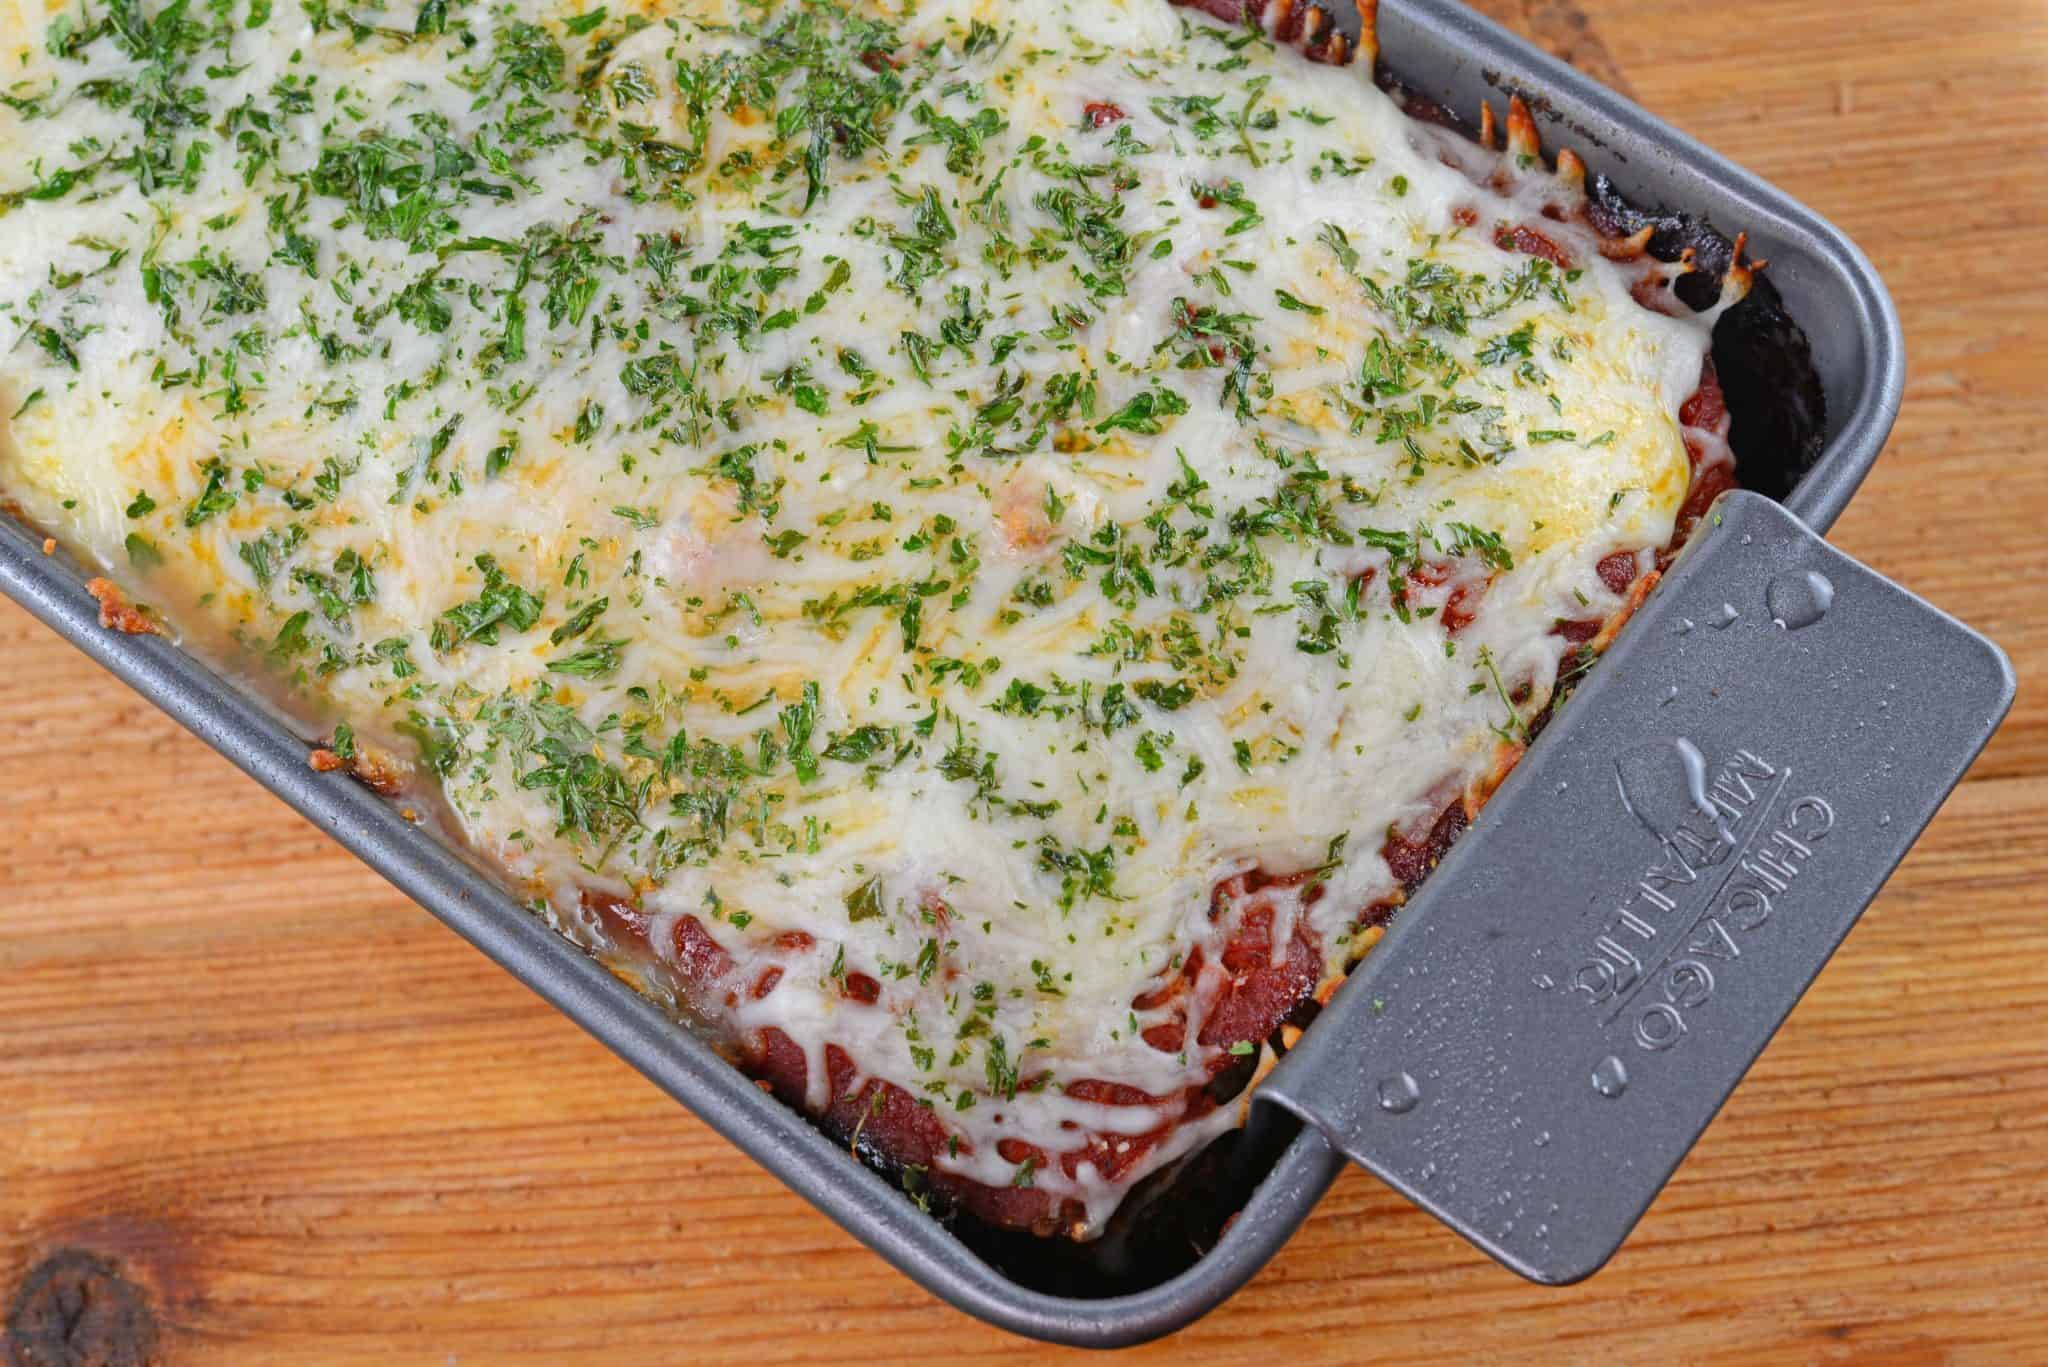 Italian Meatloaf blends Italian sausage and ground beef with spices and cheese for a tender one dish meal.